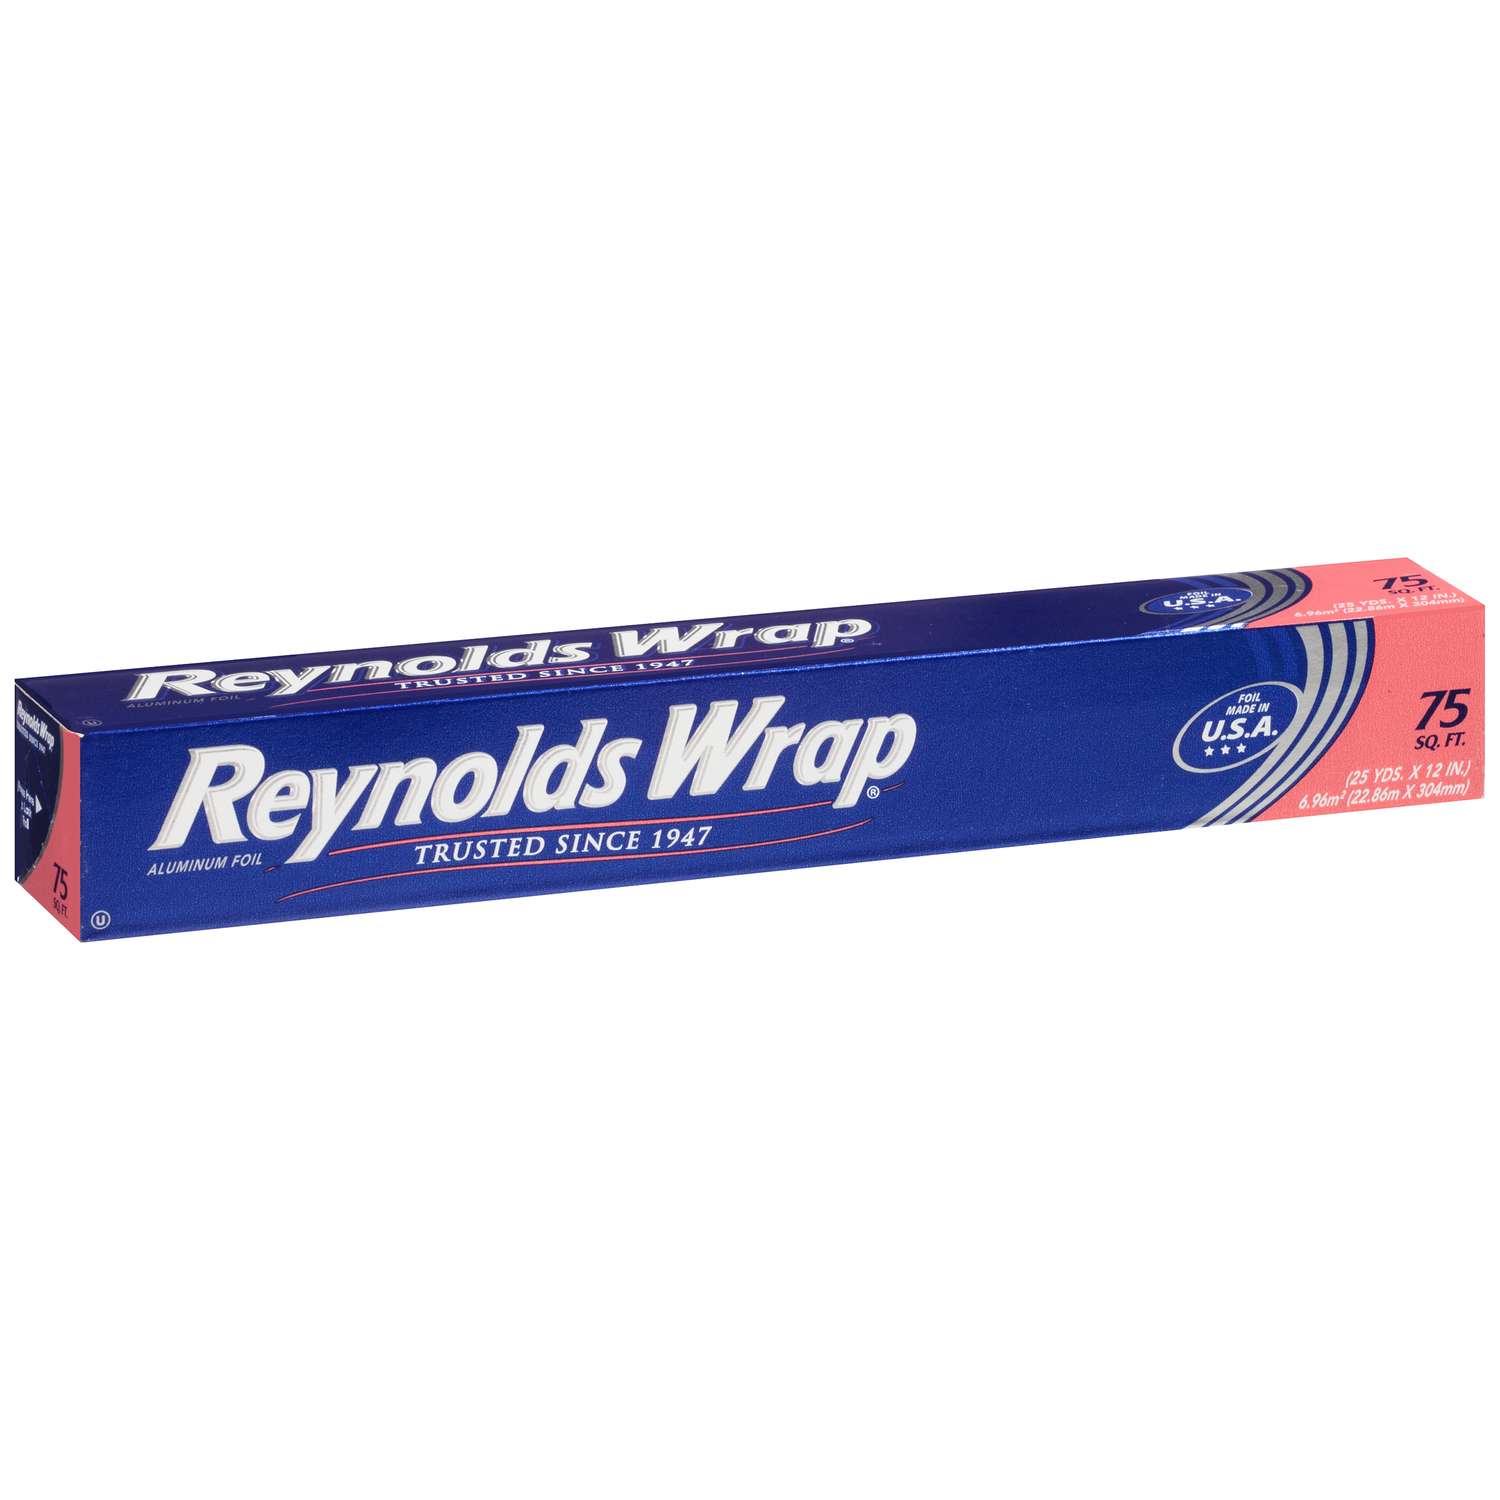 Reynolds Wrap Aluminum Foil, 100% Recycled, 75 Square Feet STORE PICKUP  ONLY